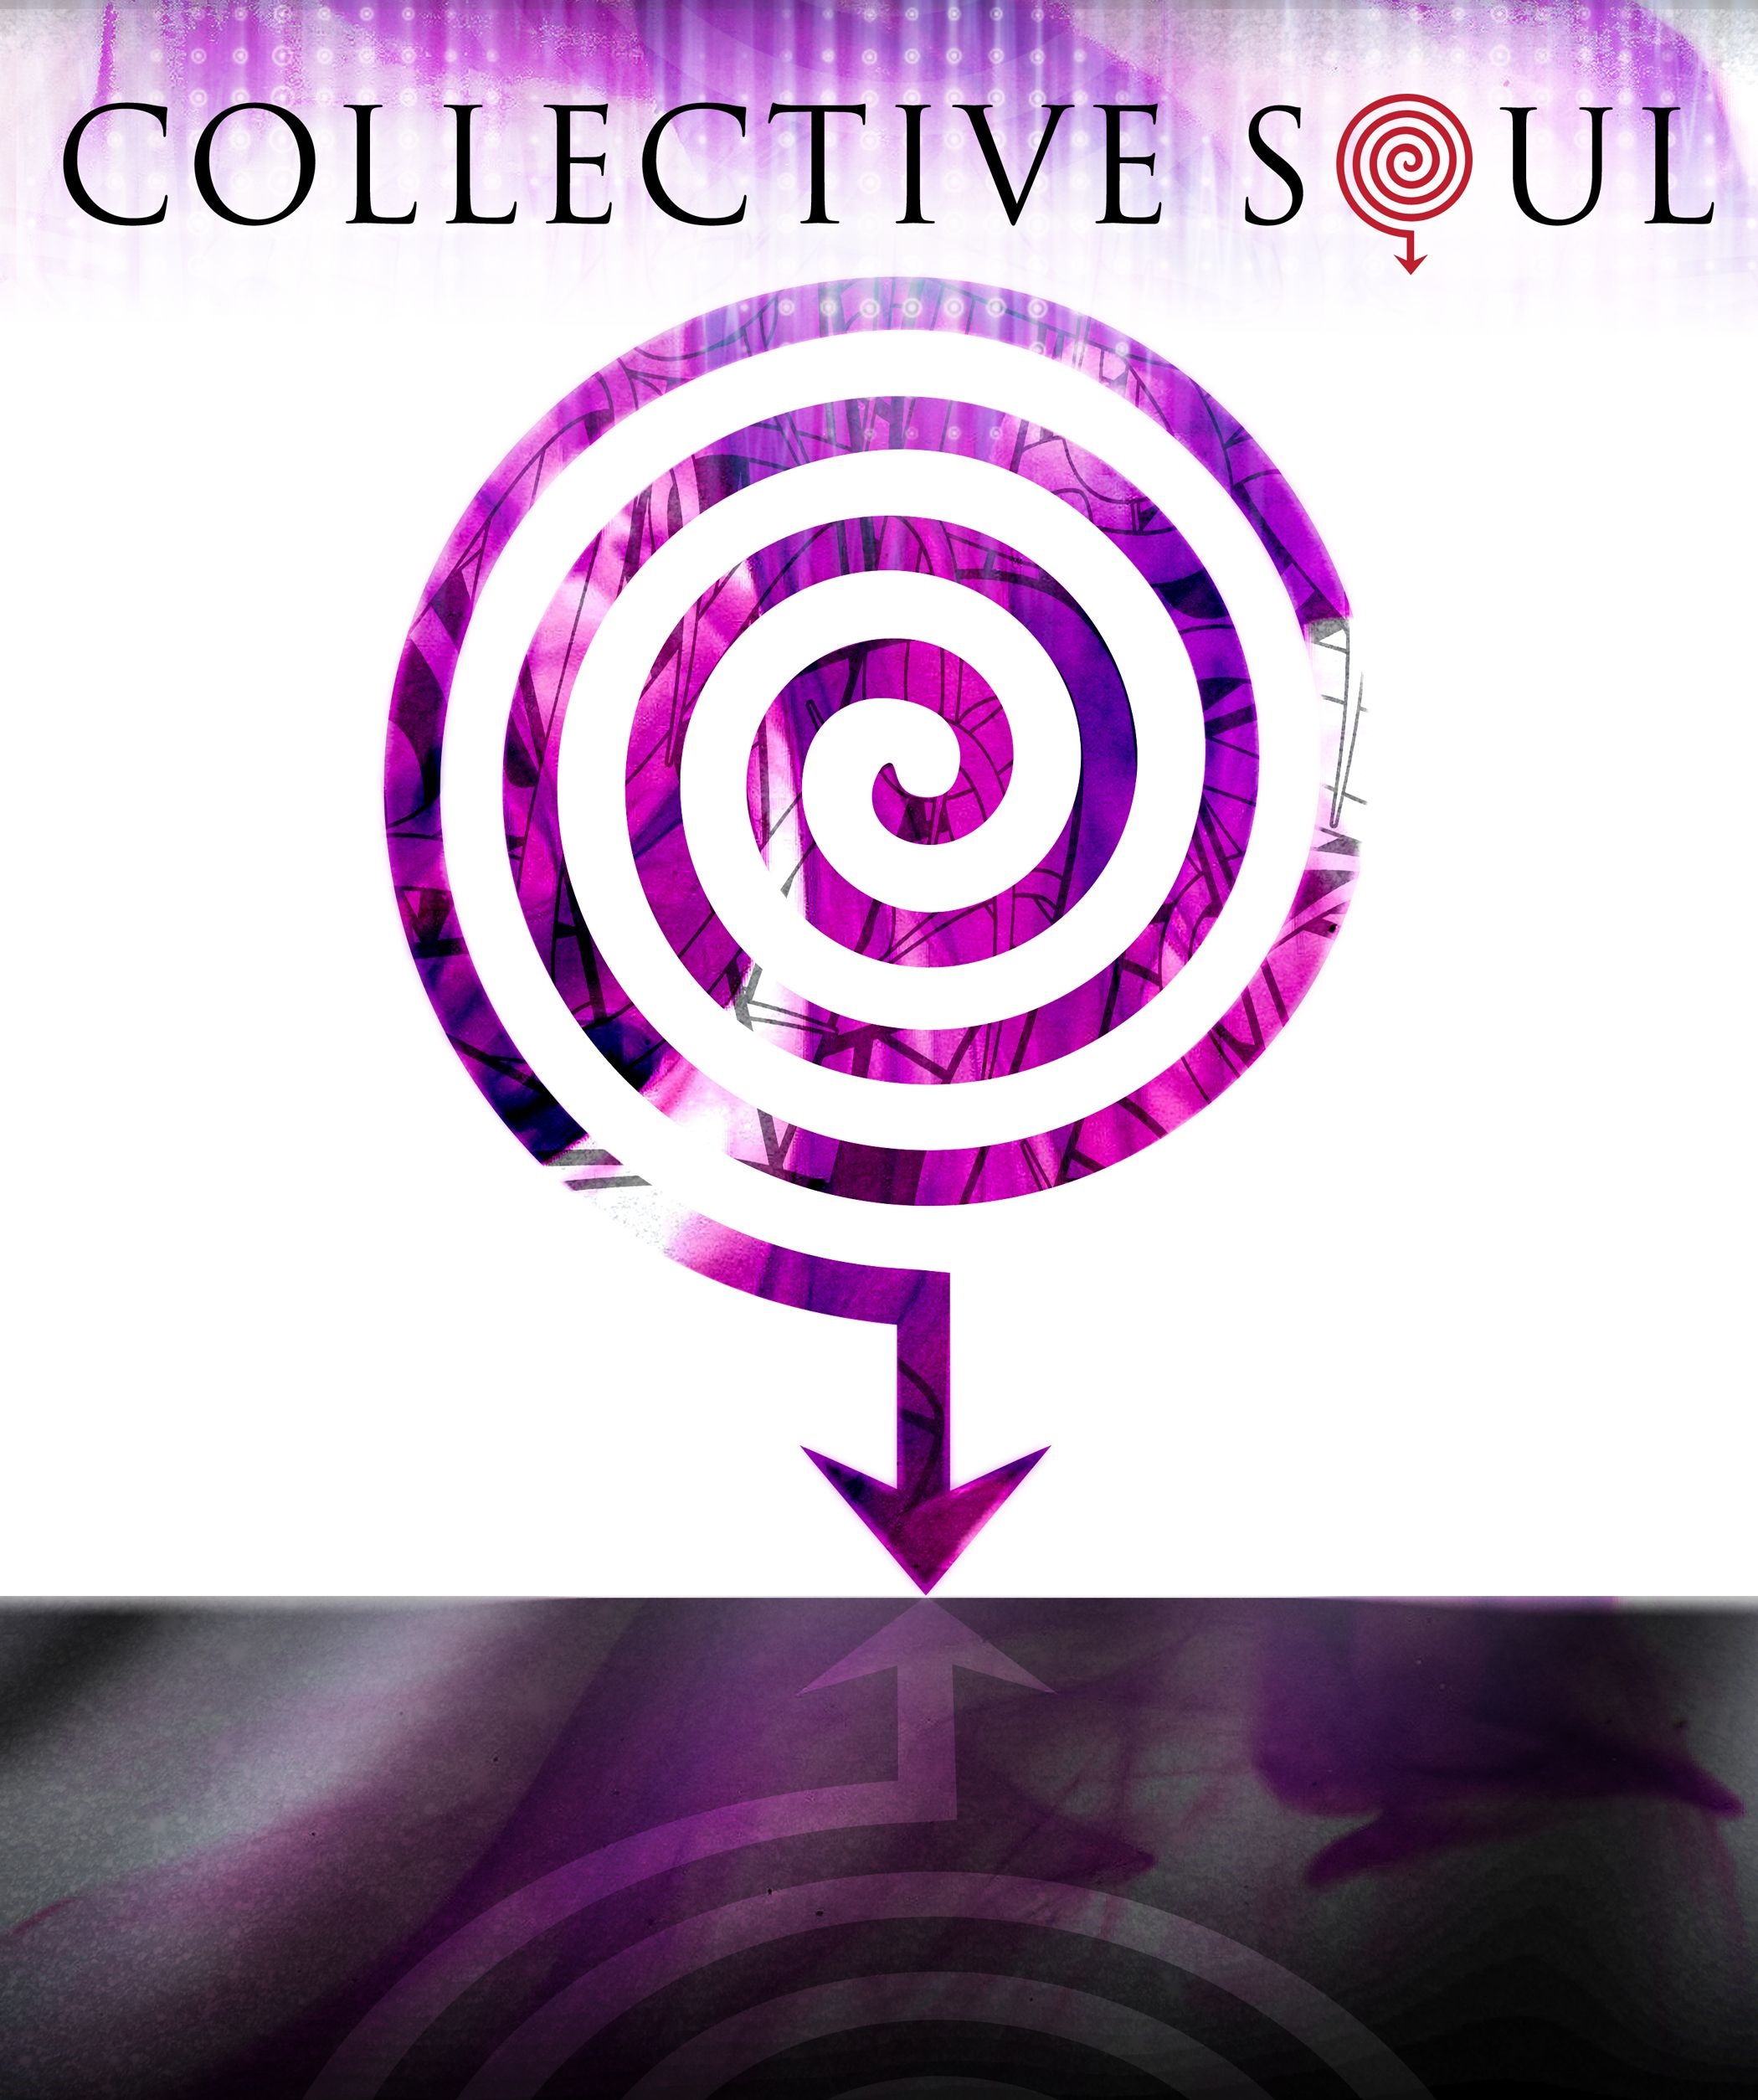 Collective Soul, Collectible logo pin, Iconic band symbol, Unique band merch, 2100x2510 HD Phone